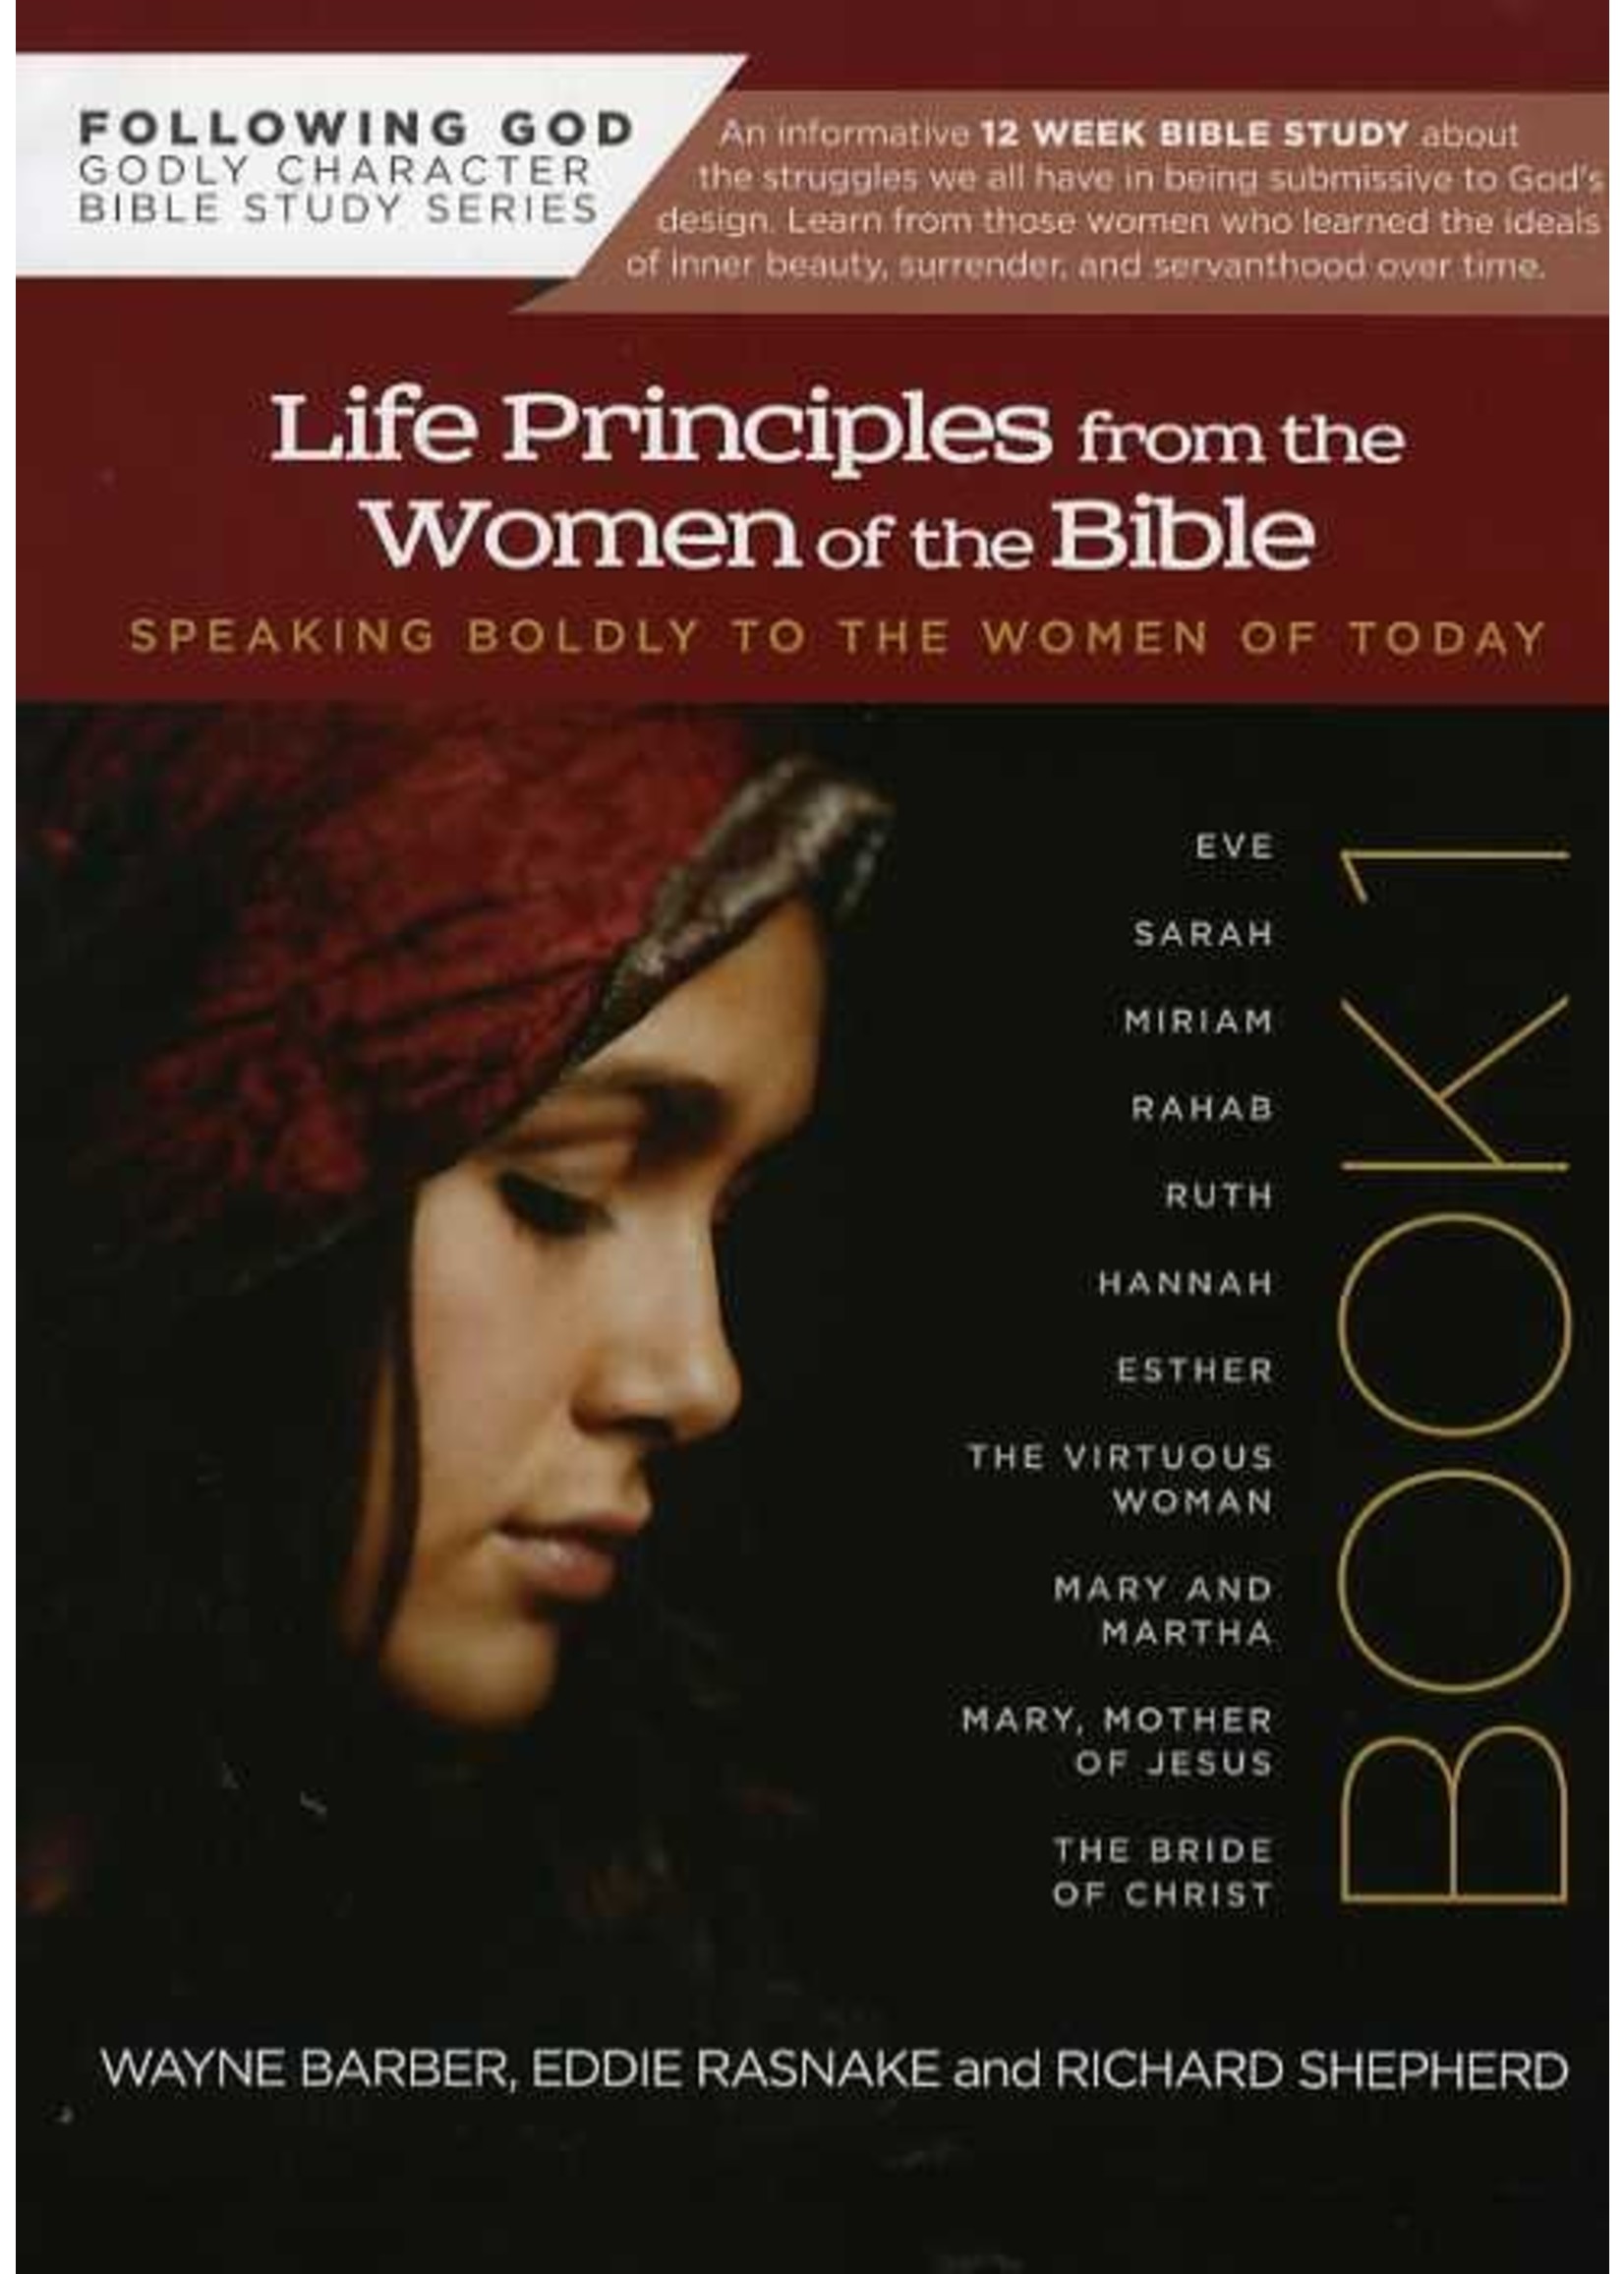 AMG Publishers Life Principles from Women of the Bible - Wayne Barber